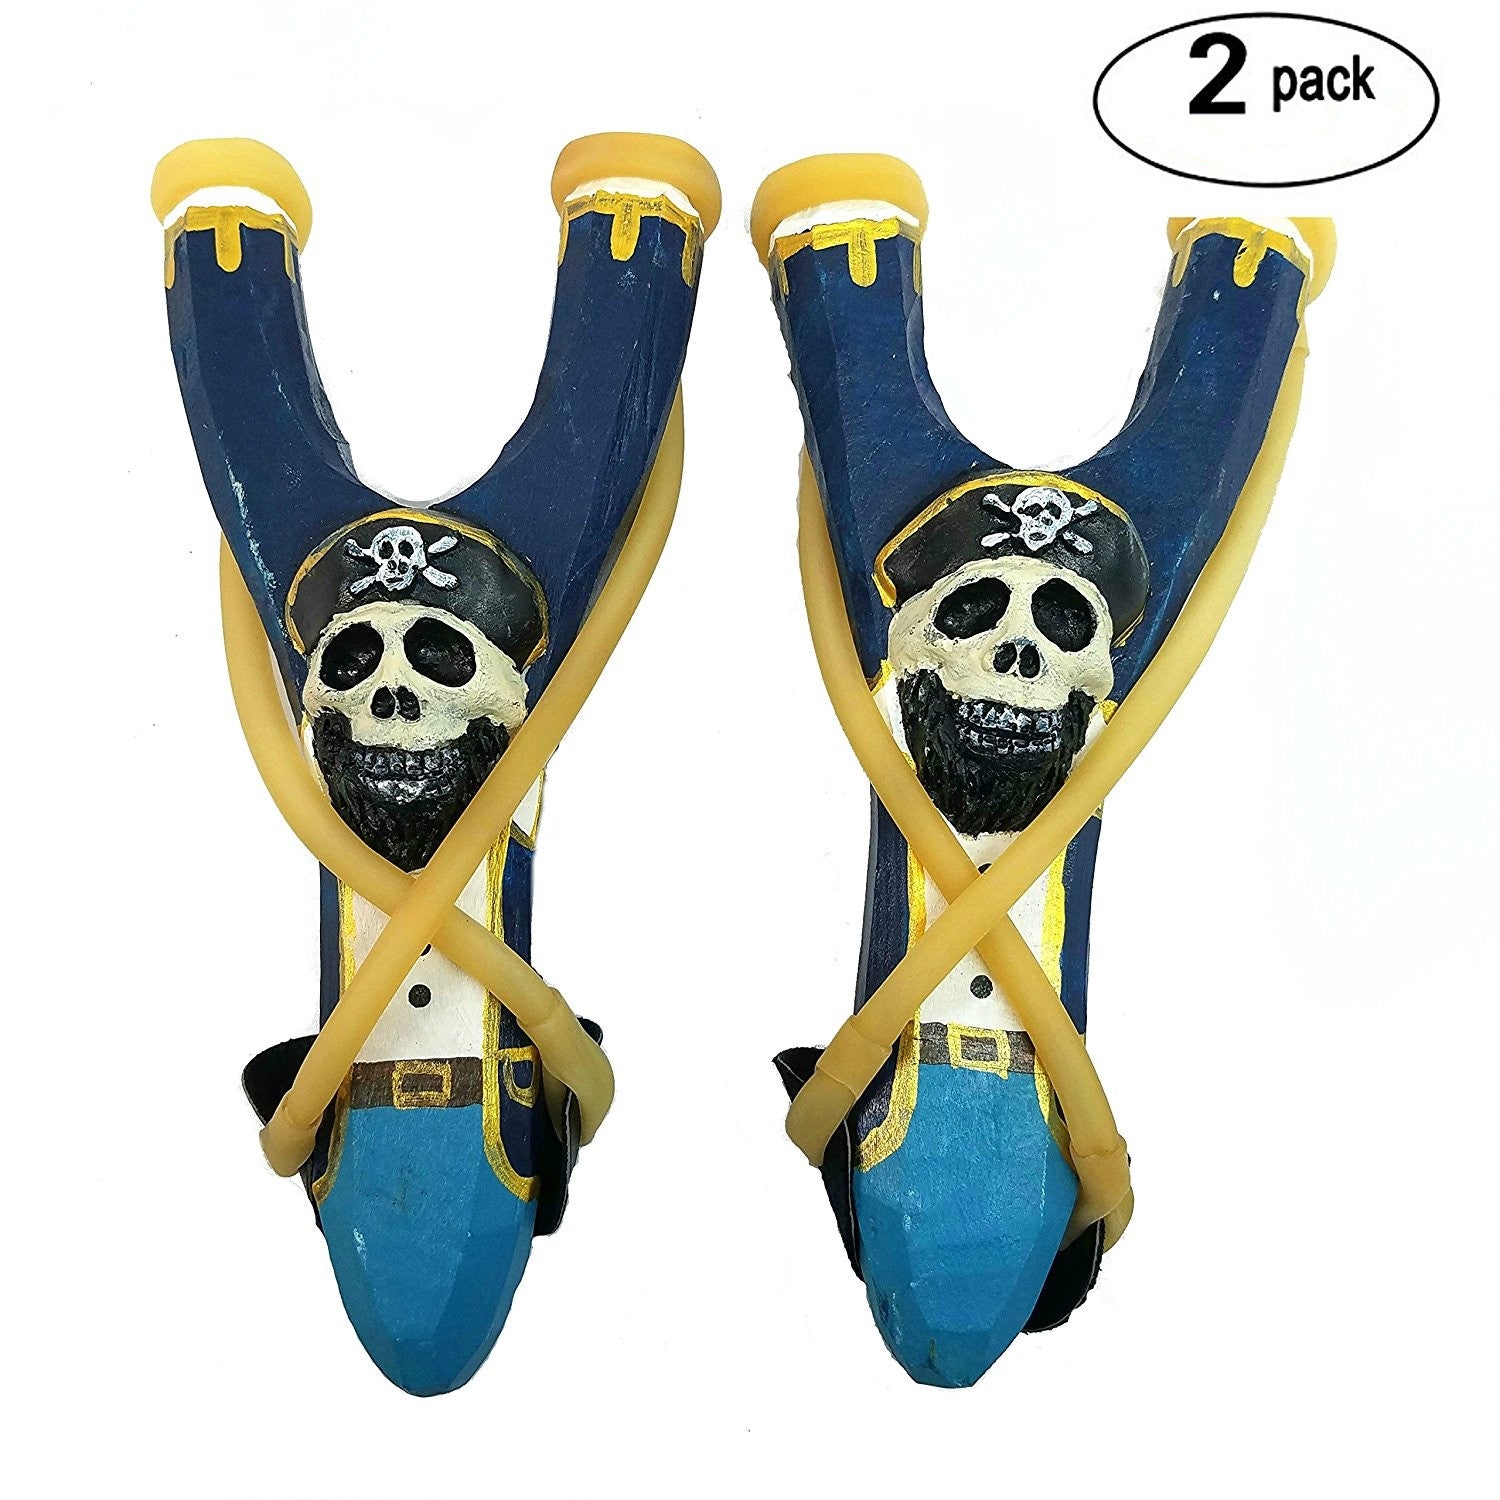 Handmade Wooden Pirate Toy Launchers 2-Pack